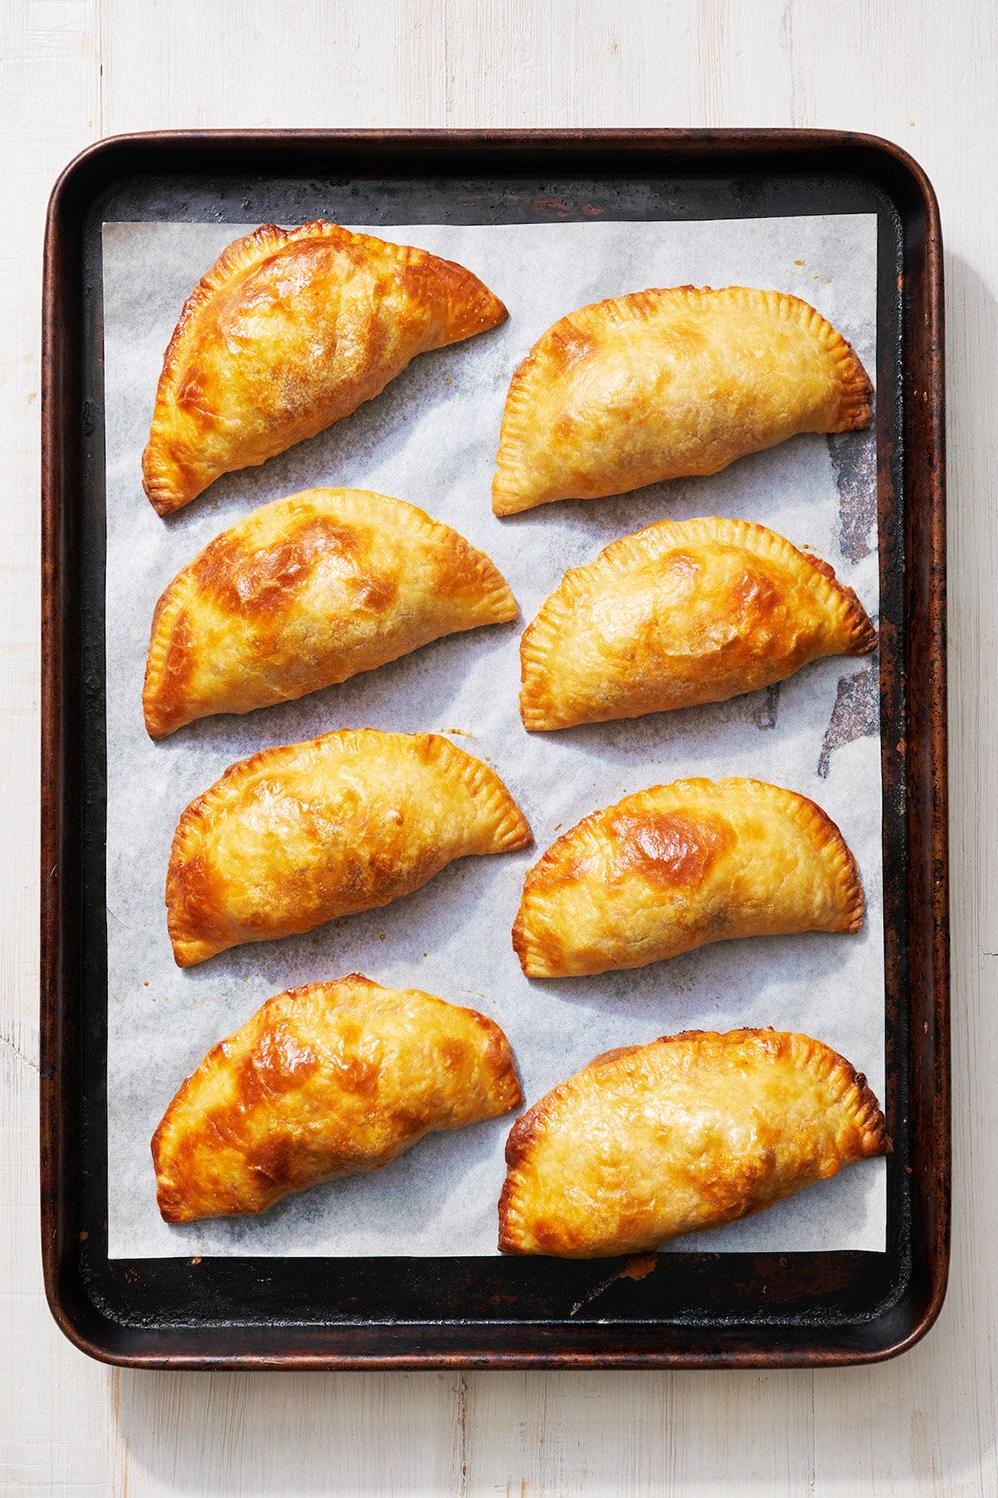  The perfect breakfast on-the-go: light and flavorful empanadas